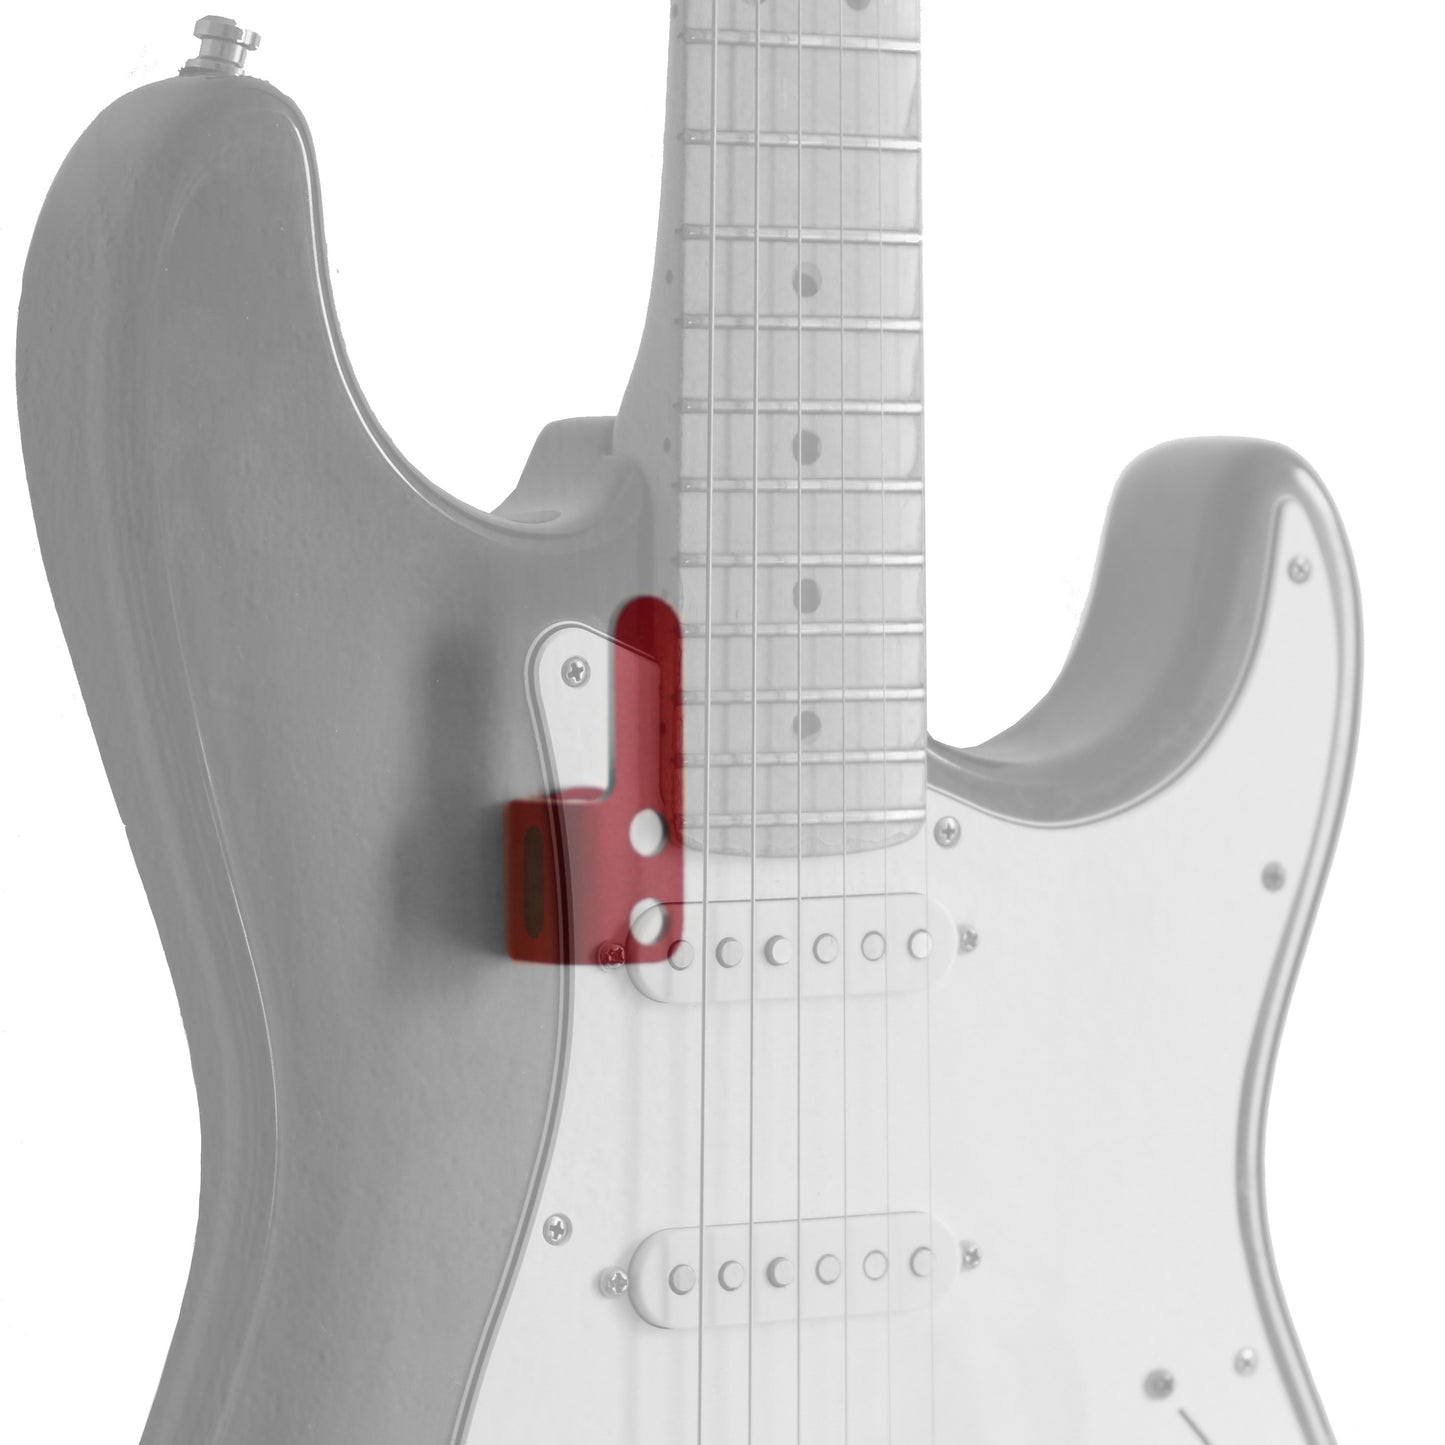 Stratocaster with transparency and hoverguitar hanger